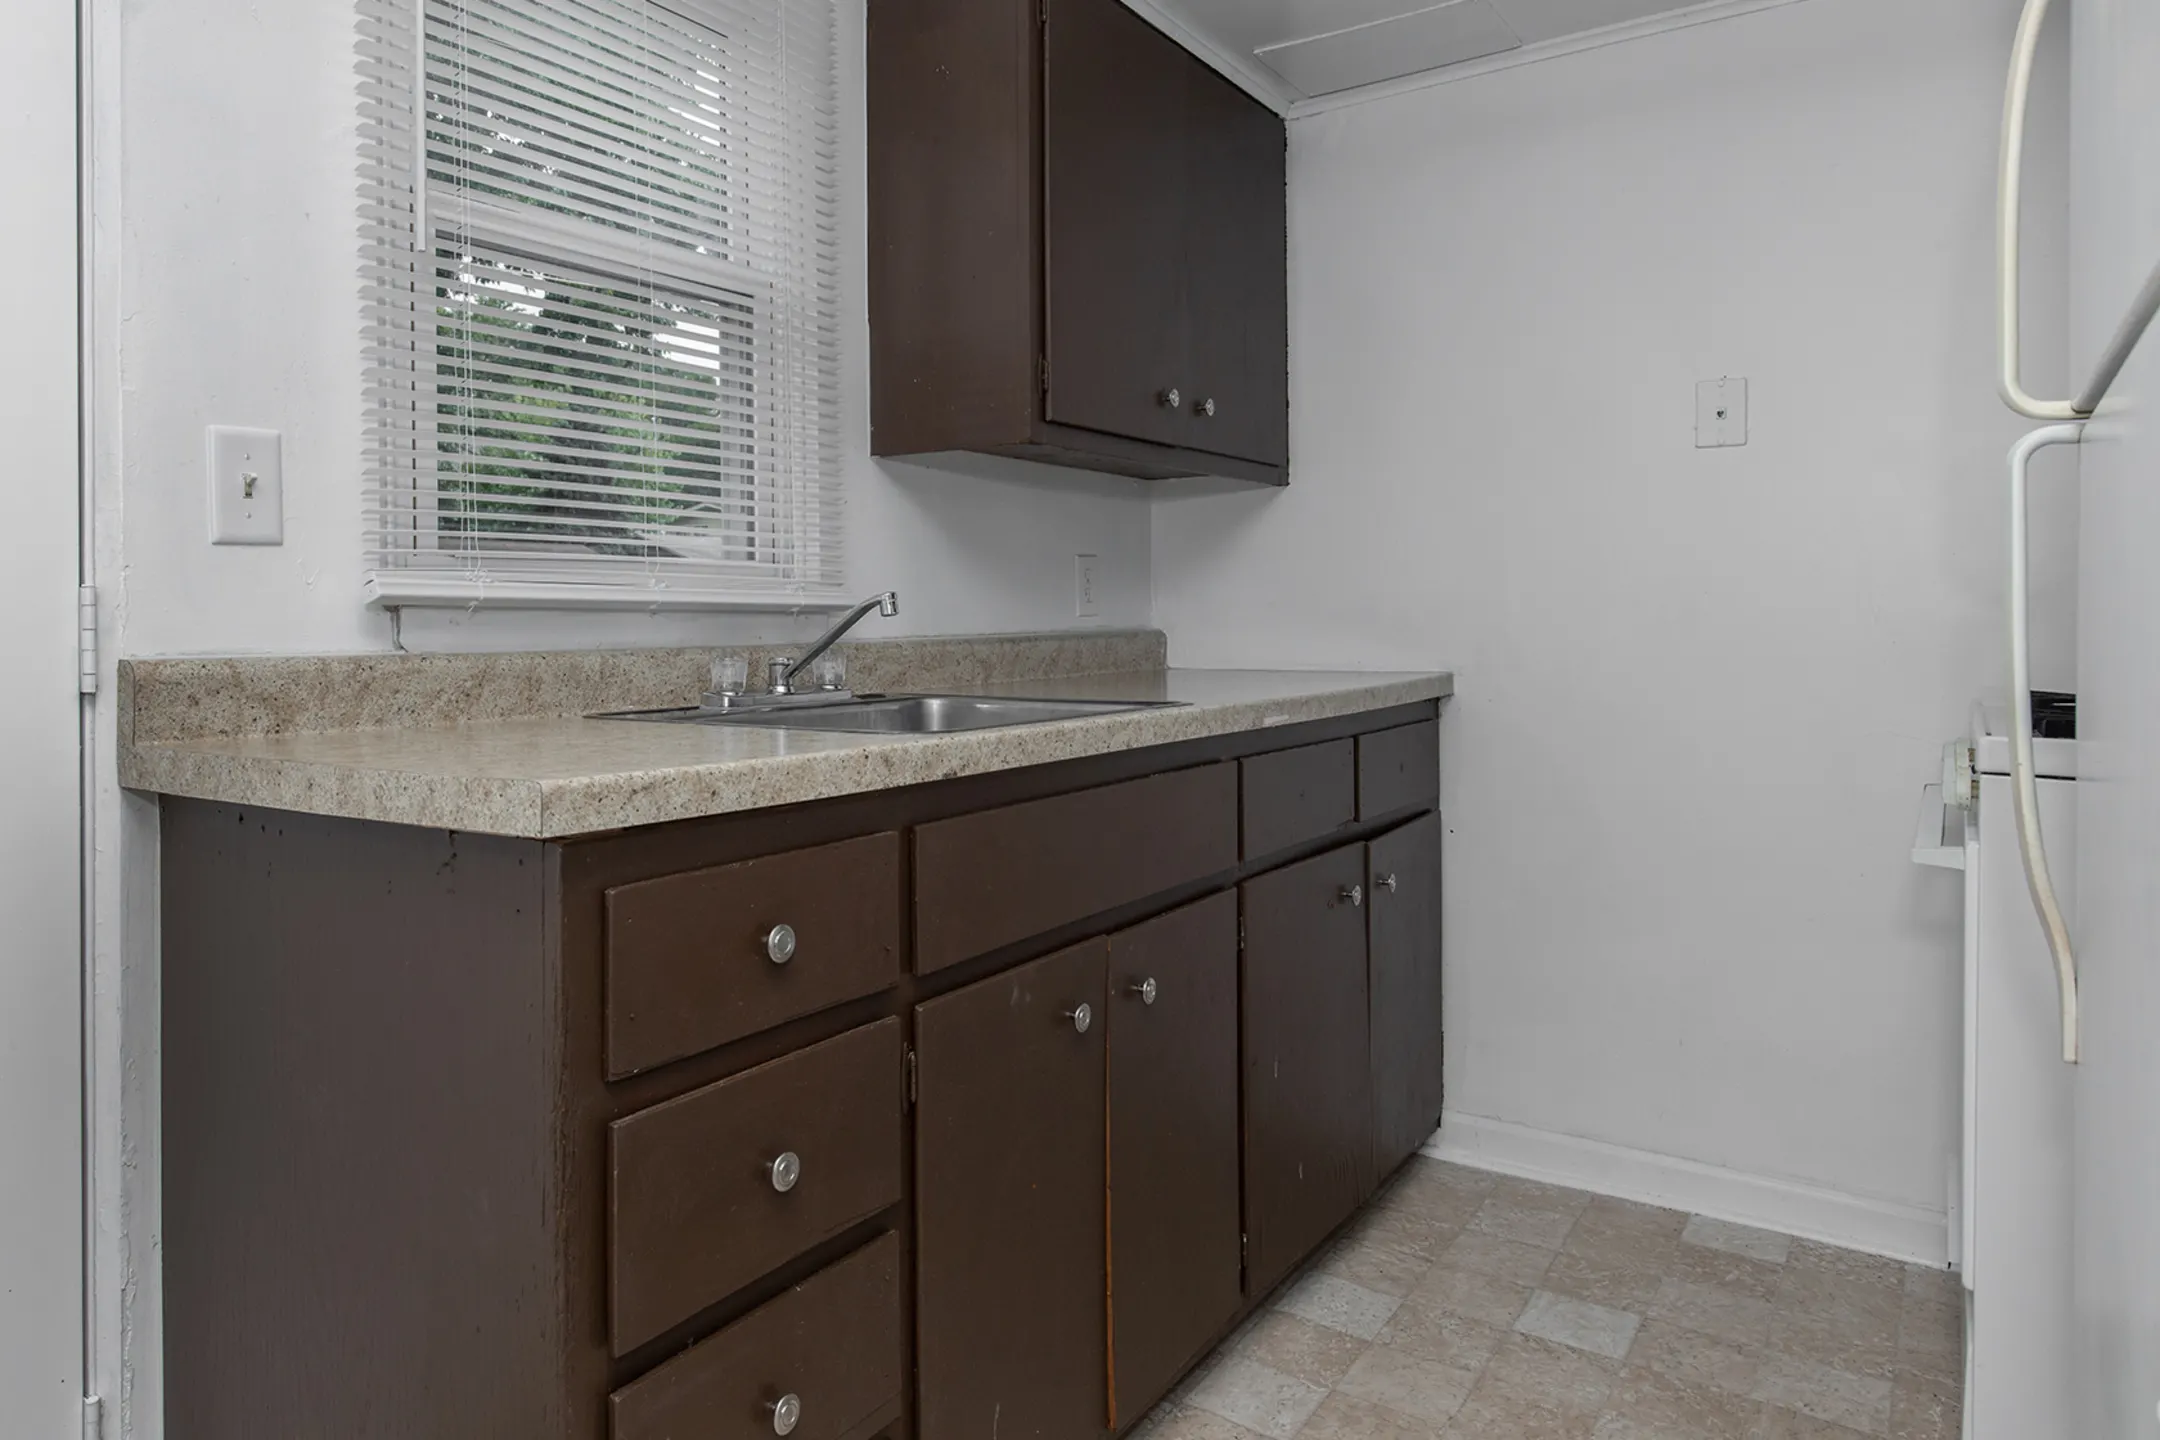 Kitchen - Downtown Town Homes - Bettendorf, IA